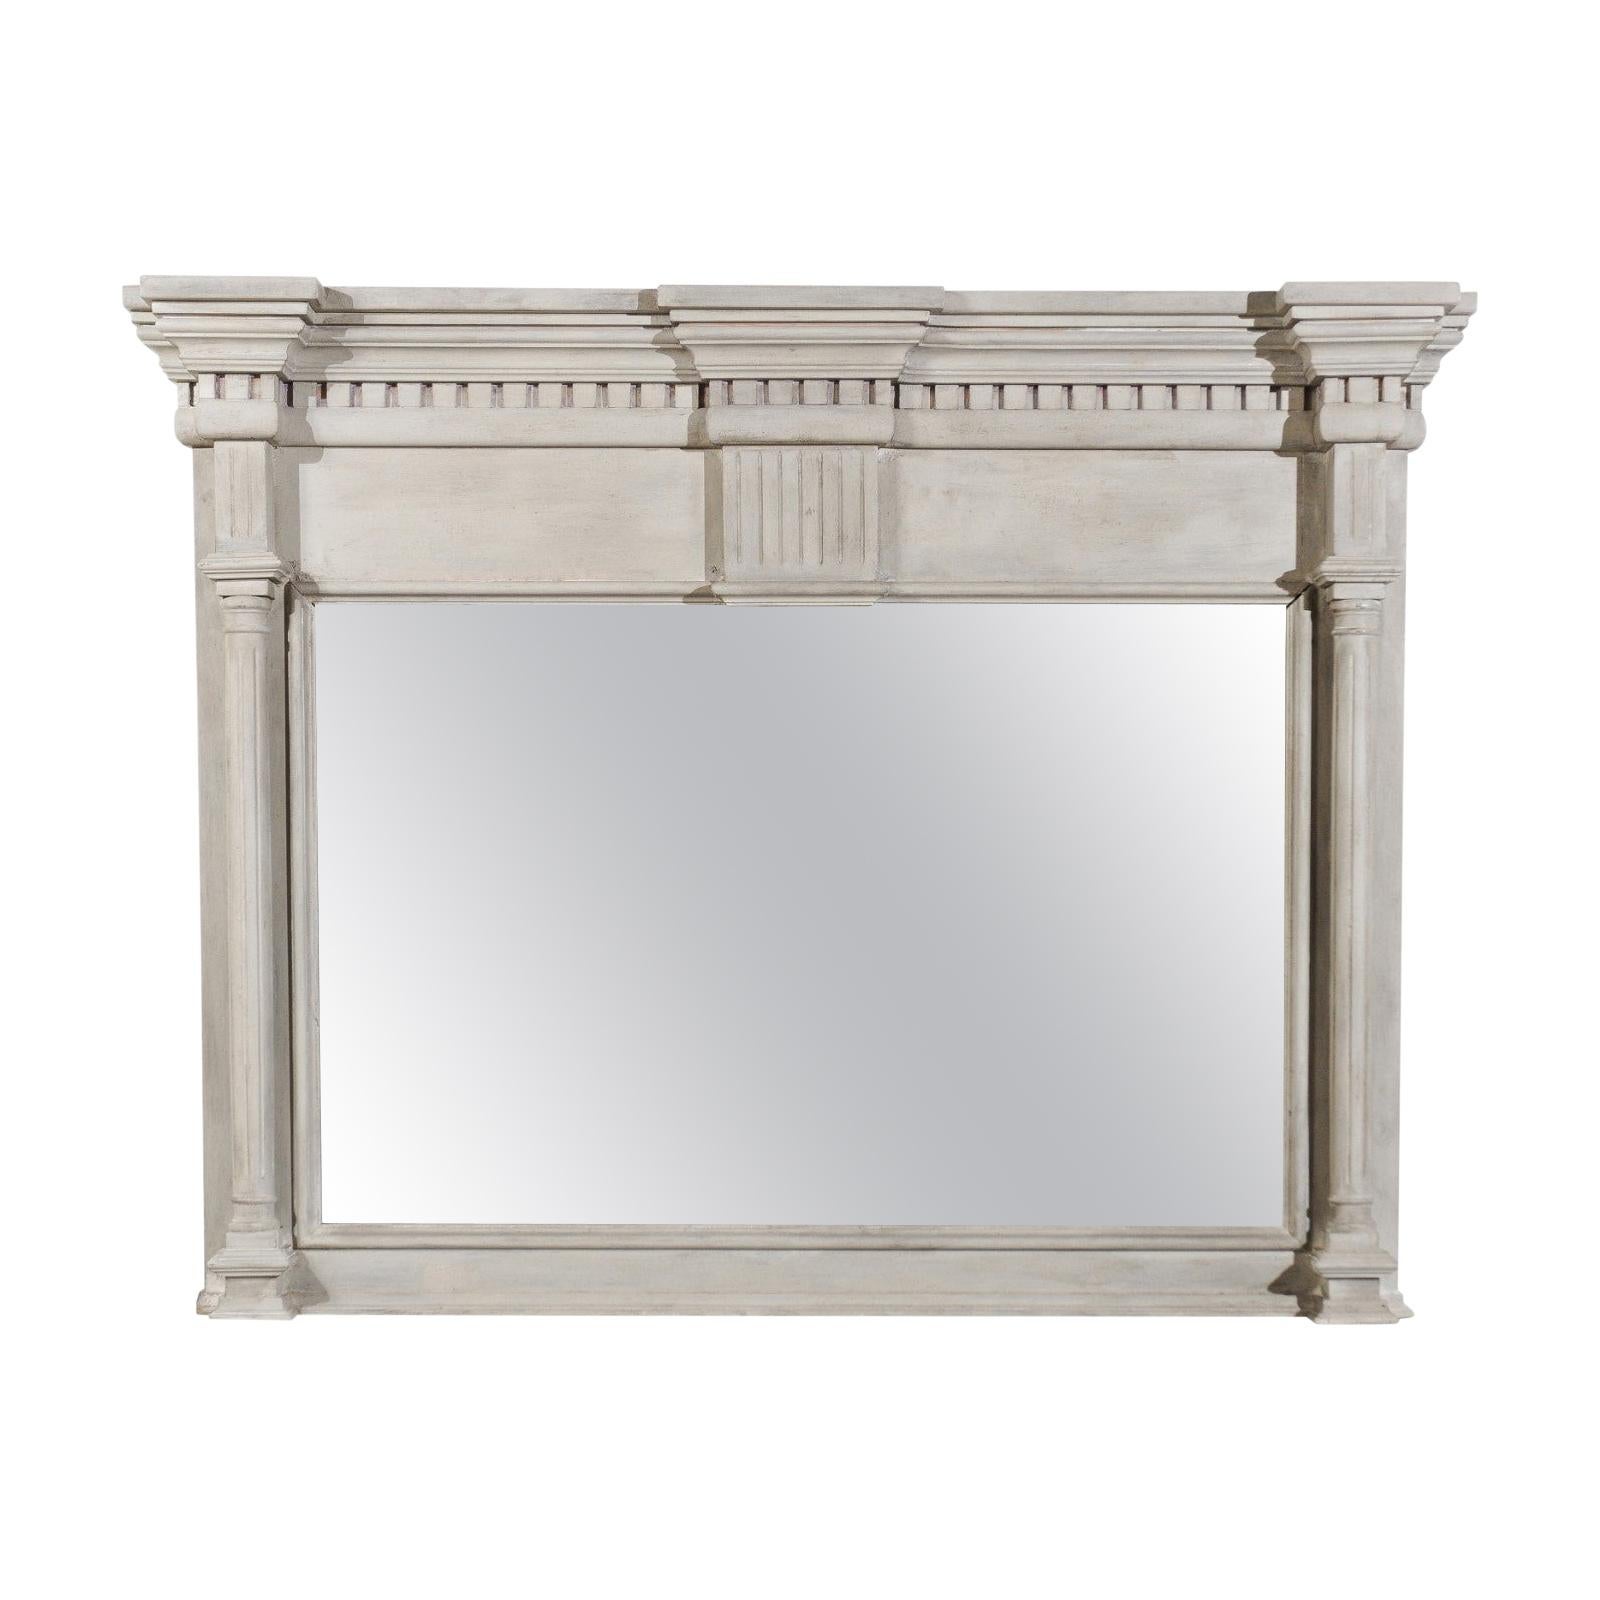 French 19th Century Neoclassical Style Architectural Element Made into a Mirror For Sale